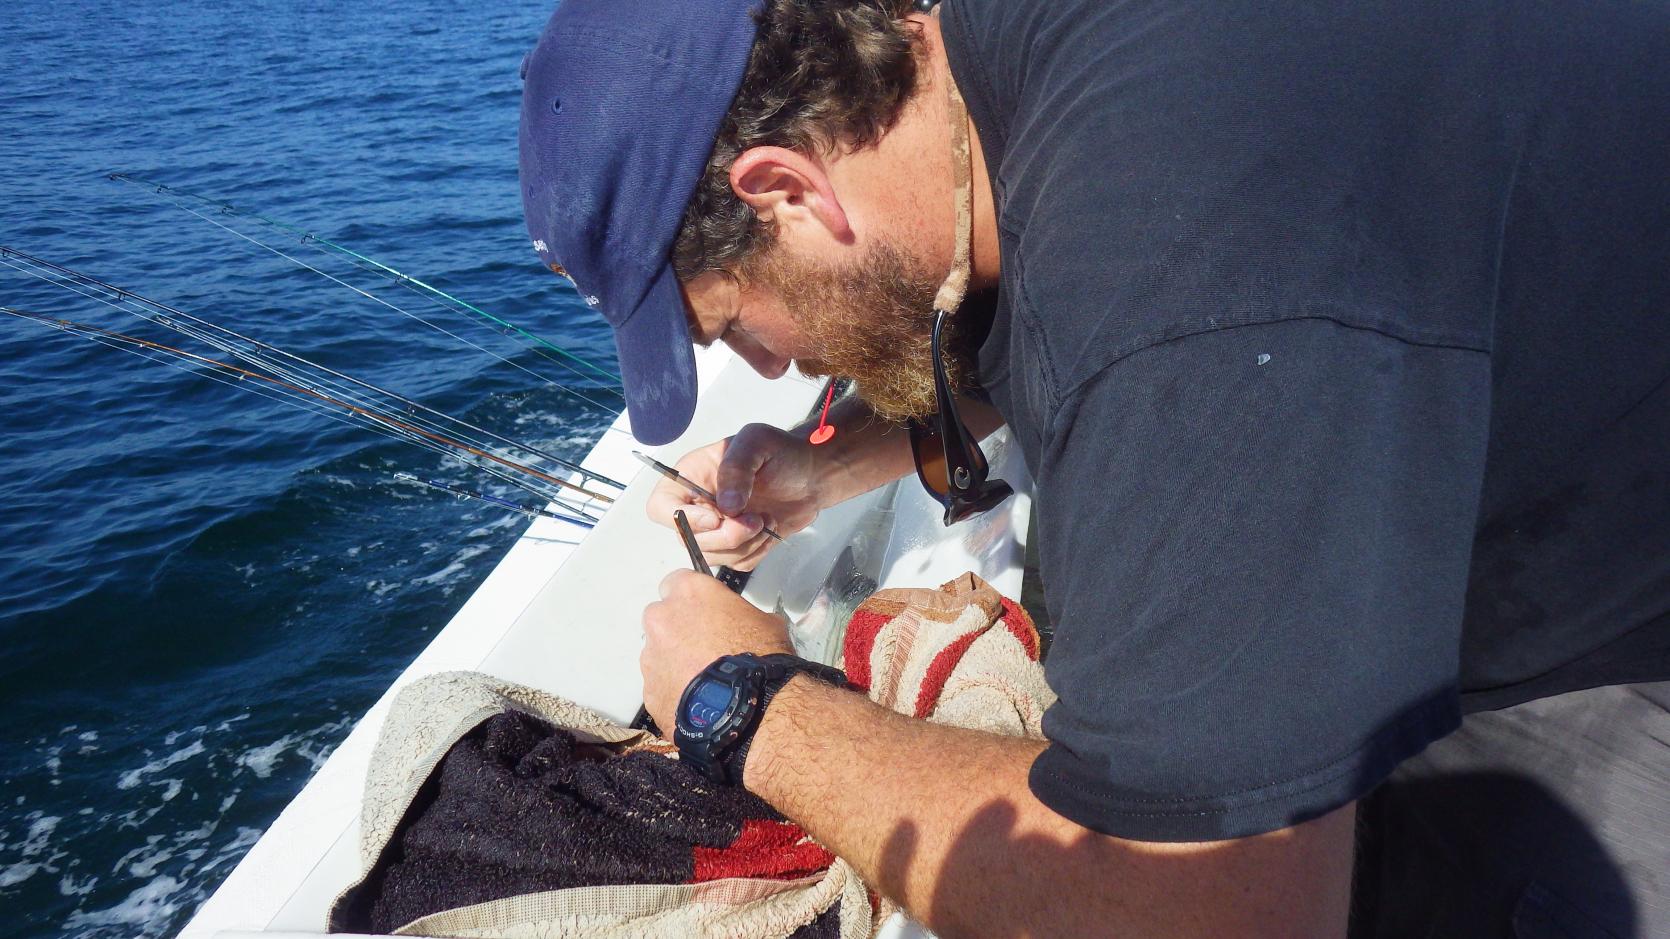 DMF’s Ben Gahagan tagging a striped bass with an acoustic receiver. 